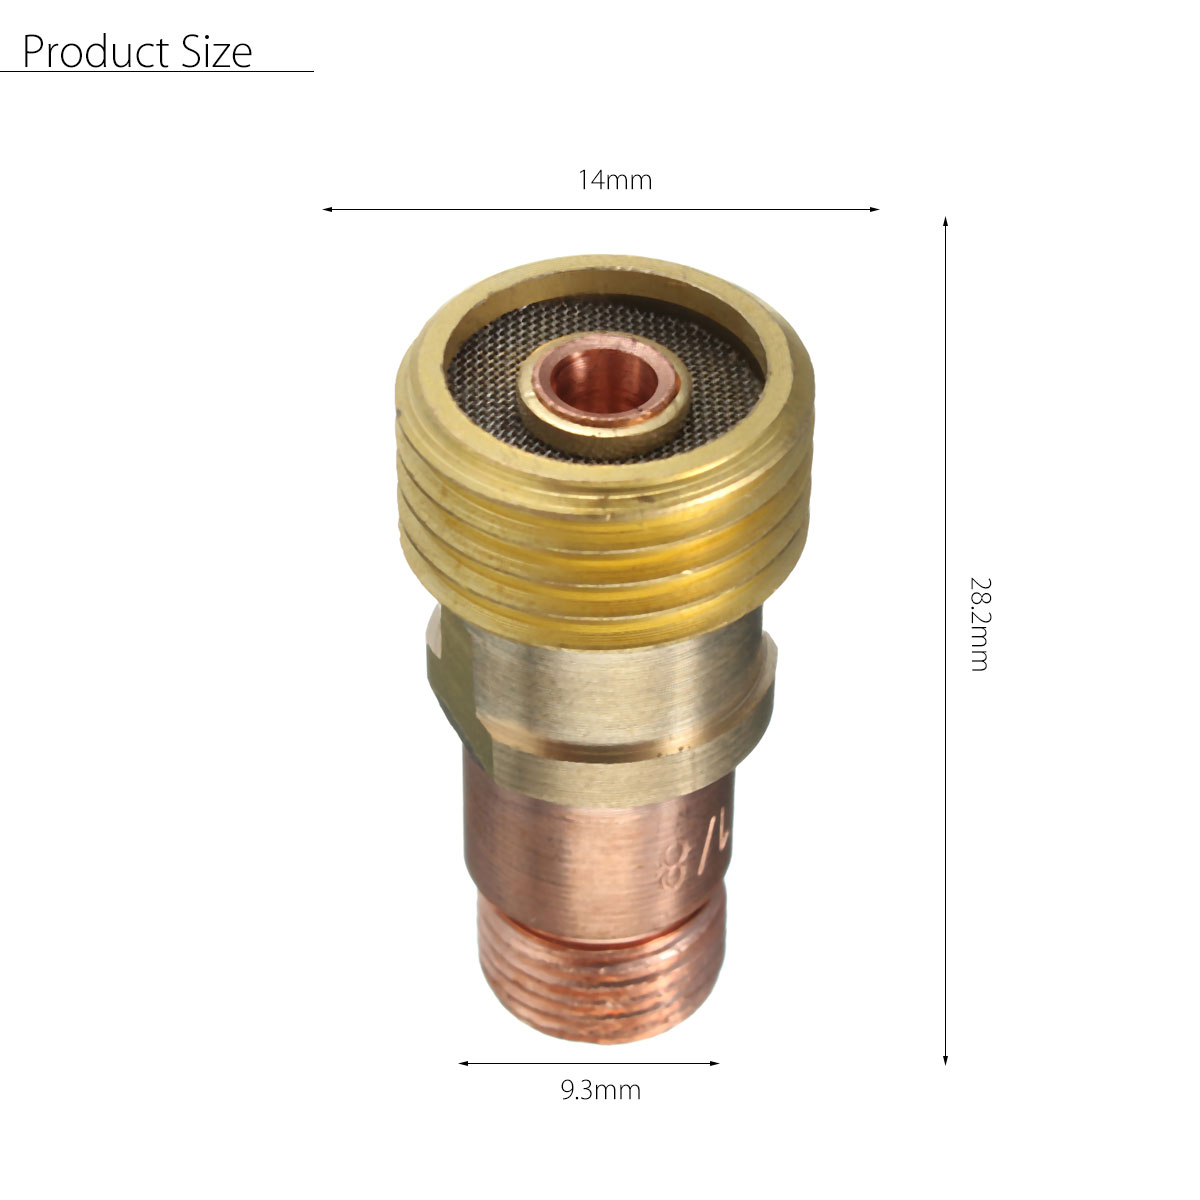 Brass-Collets-Stubby-Gas-Lens-Connector-With-Mesh-For-Tig-WP-171826-Torch-1138923-5